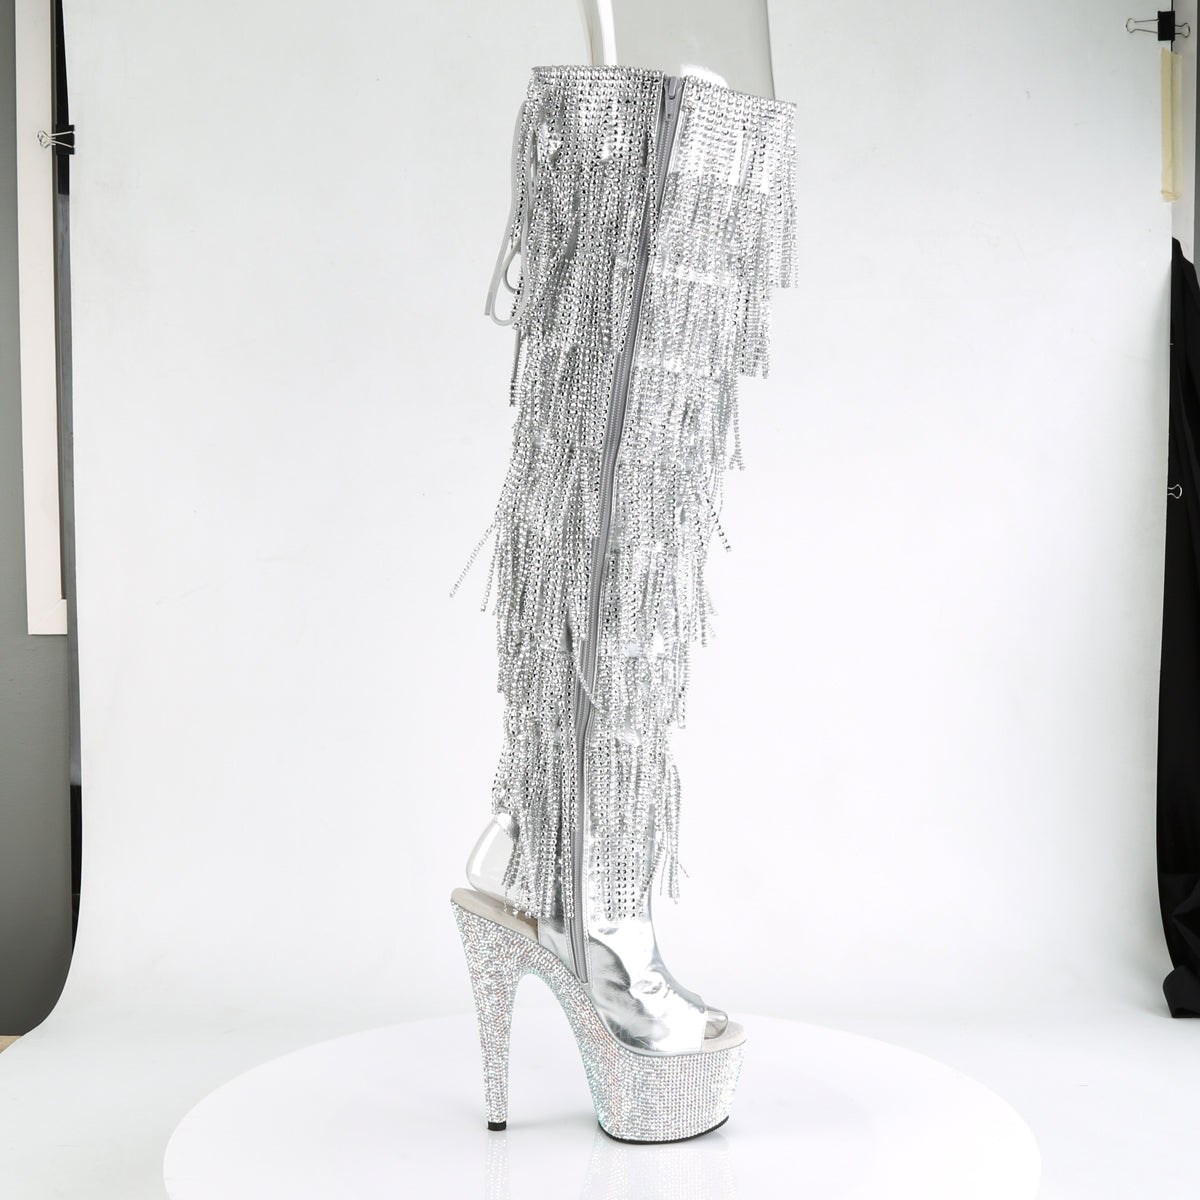 BEJEWELED-3019RSF-7 Sexy 7 Inch Heel Silver Rhinestones Boot-Pleaser- Sexy Shoes Fetish Heels